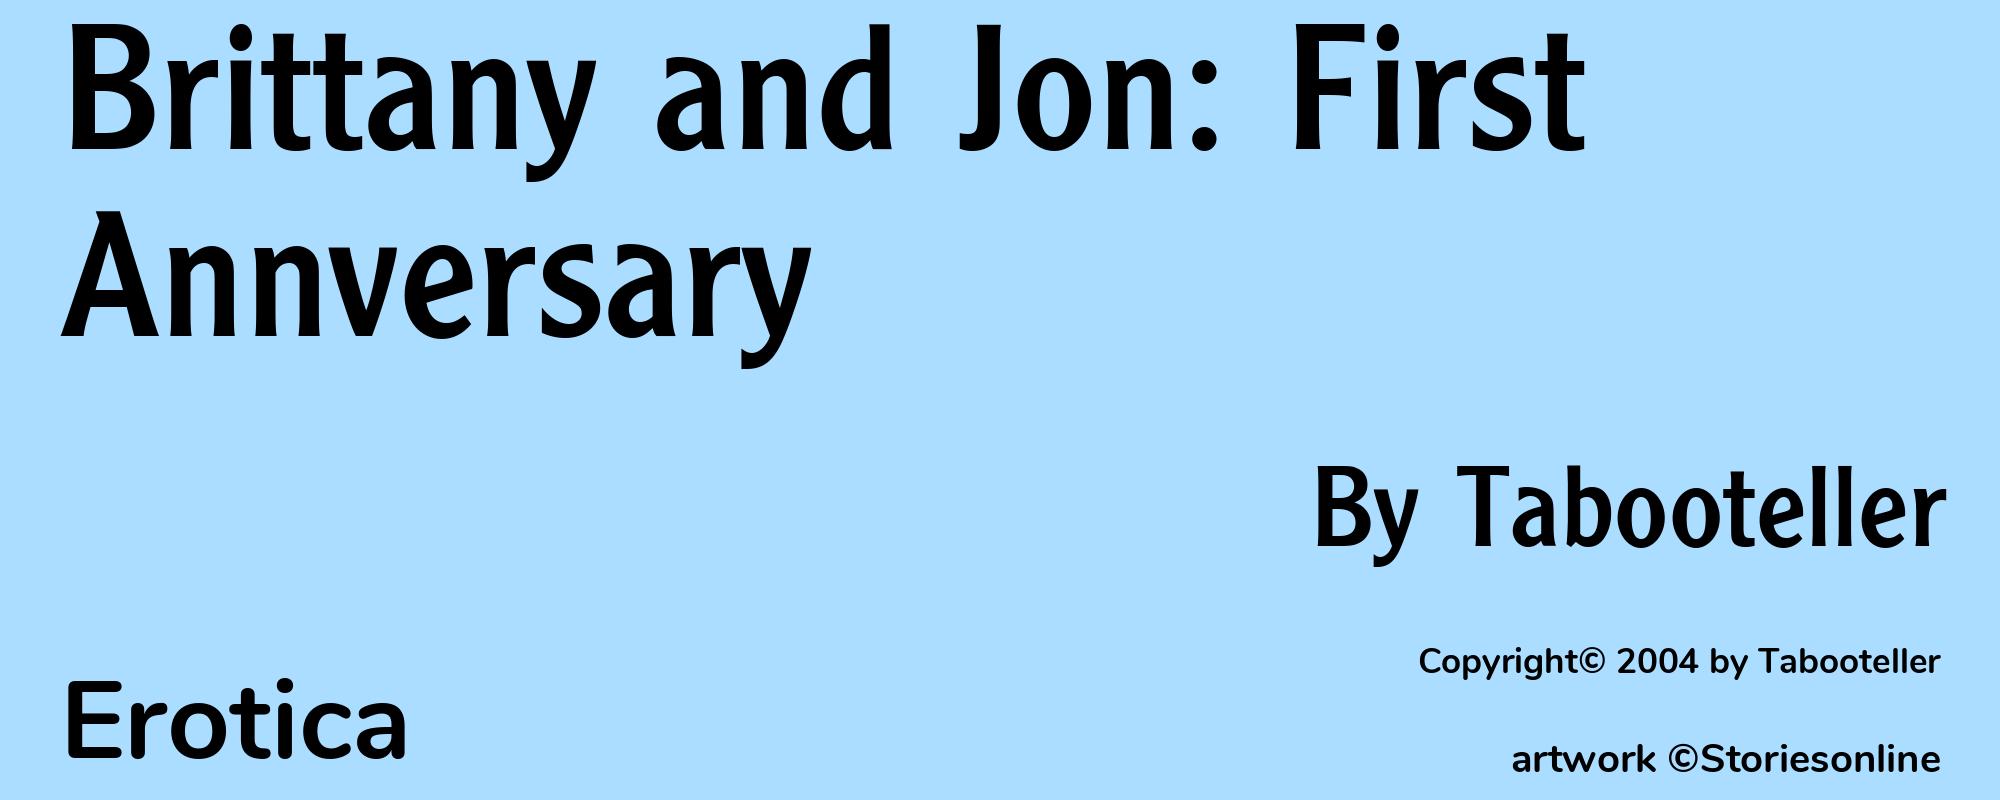 Brittany and Jon: First Annversary - Cover